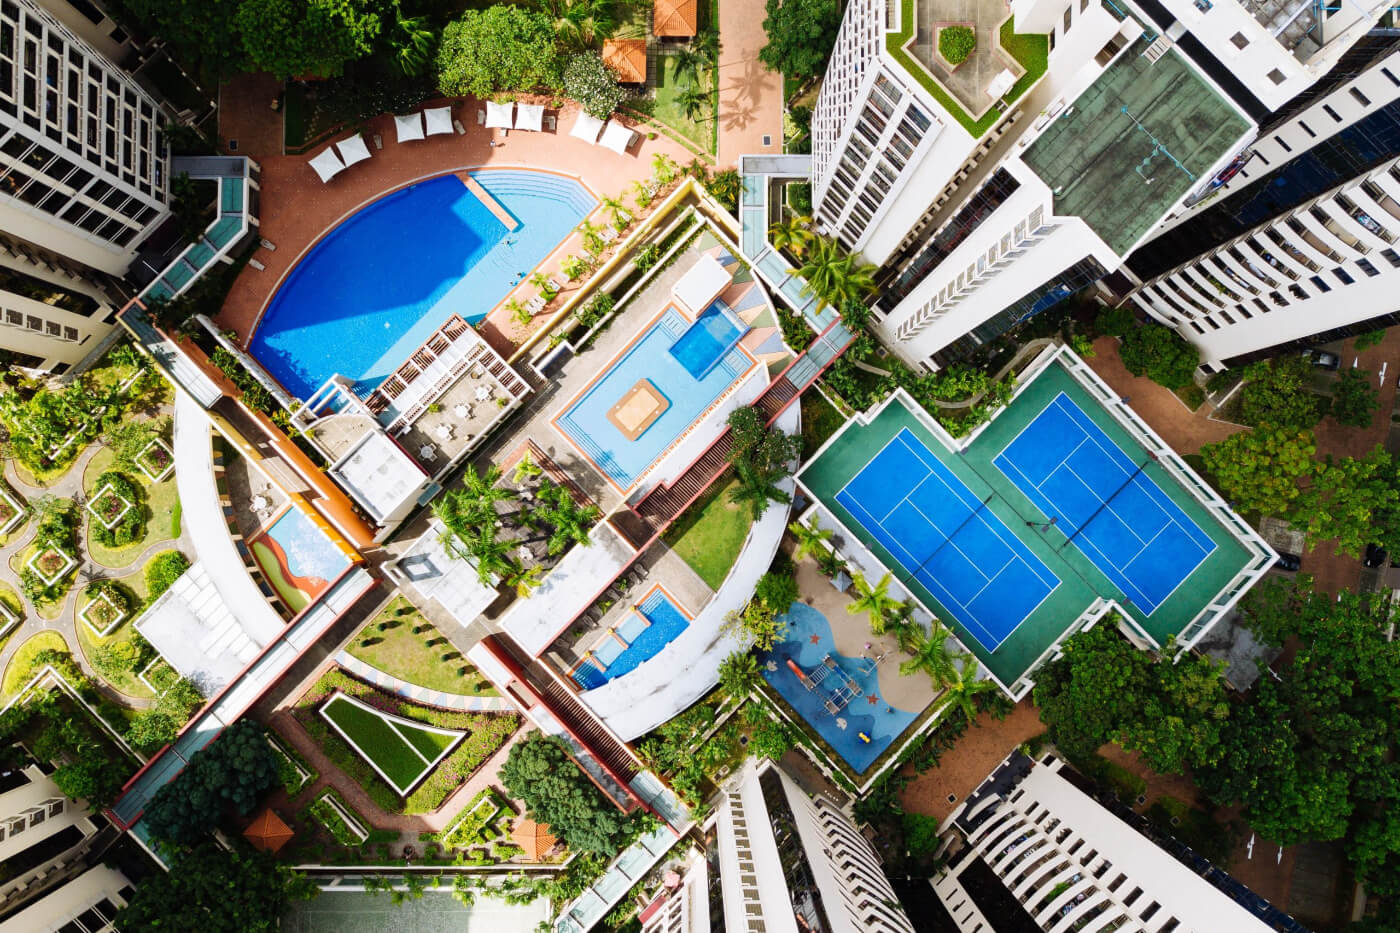 Aerial view of a residential complex with a swimming pool and tennis courts surrounded by lush greenery.